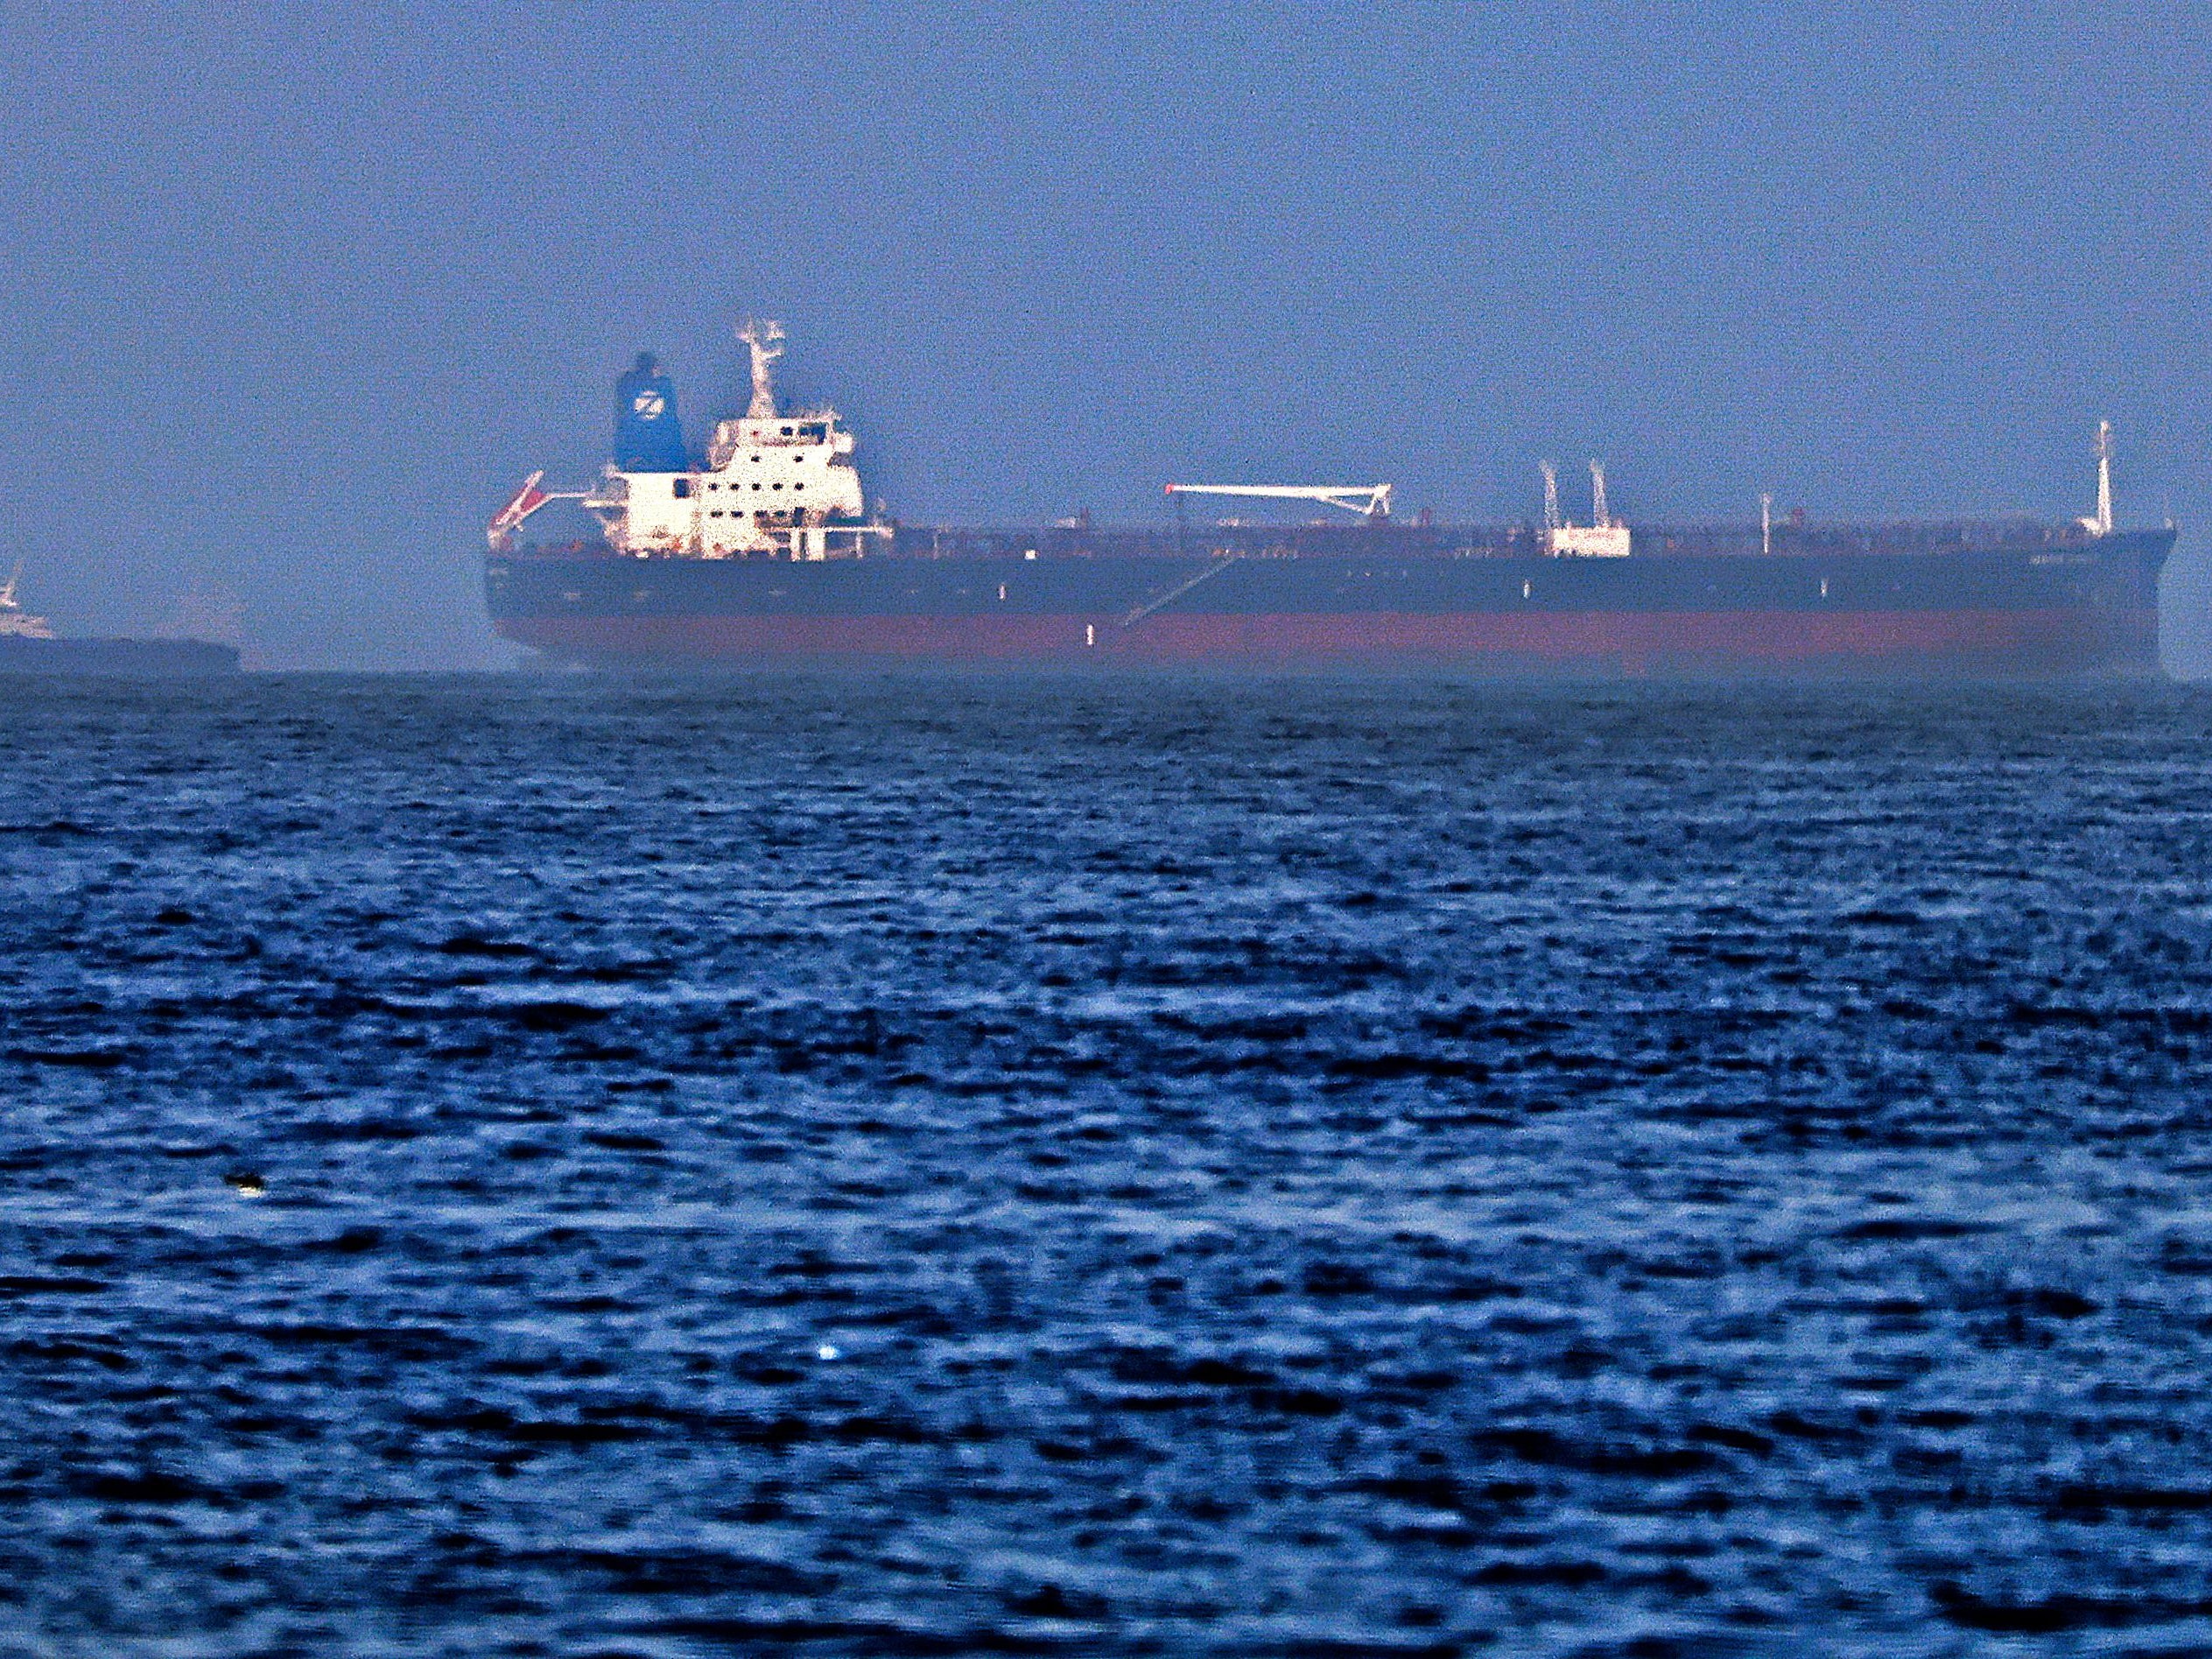 Last week, a drone attack on an oil tanker off the coast of Oman left a British citizen dead